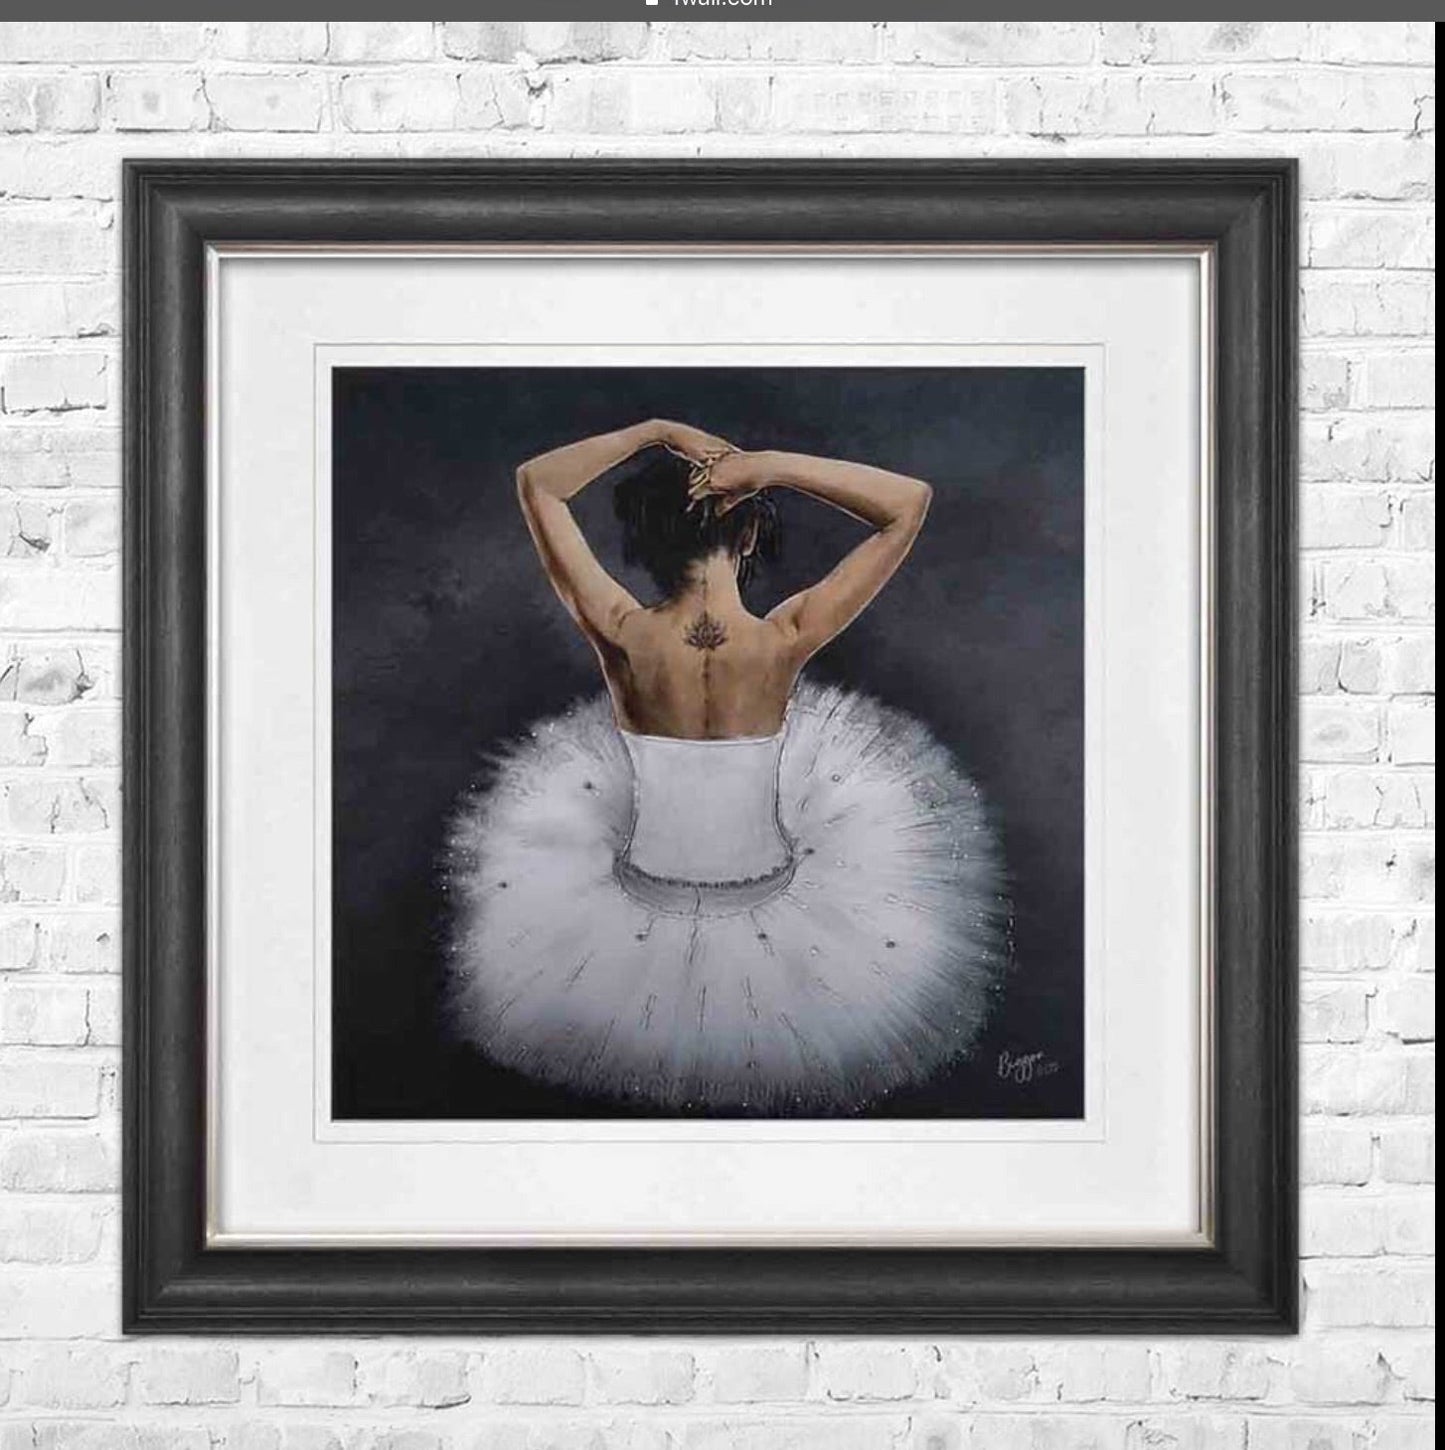 Dancing Ballerina pictured framed in 75 x 75 cm  with Vegas Scoop frame tbc